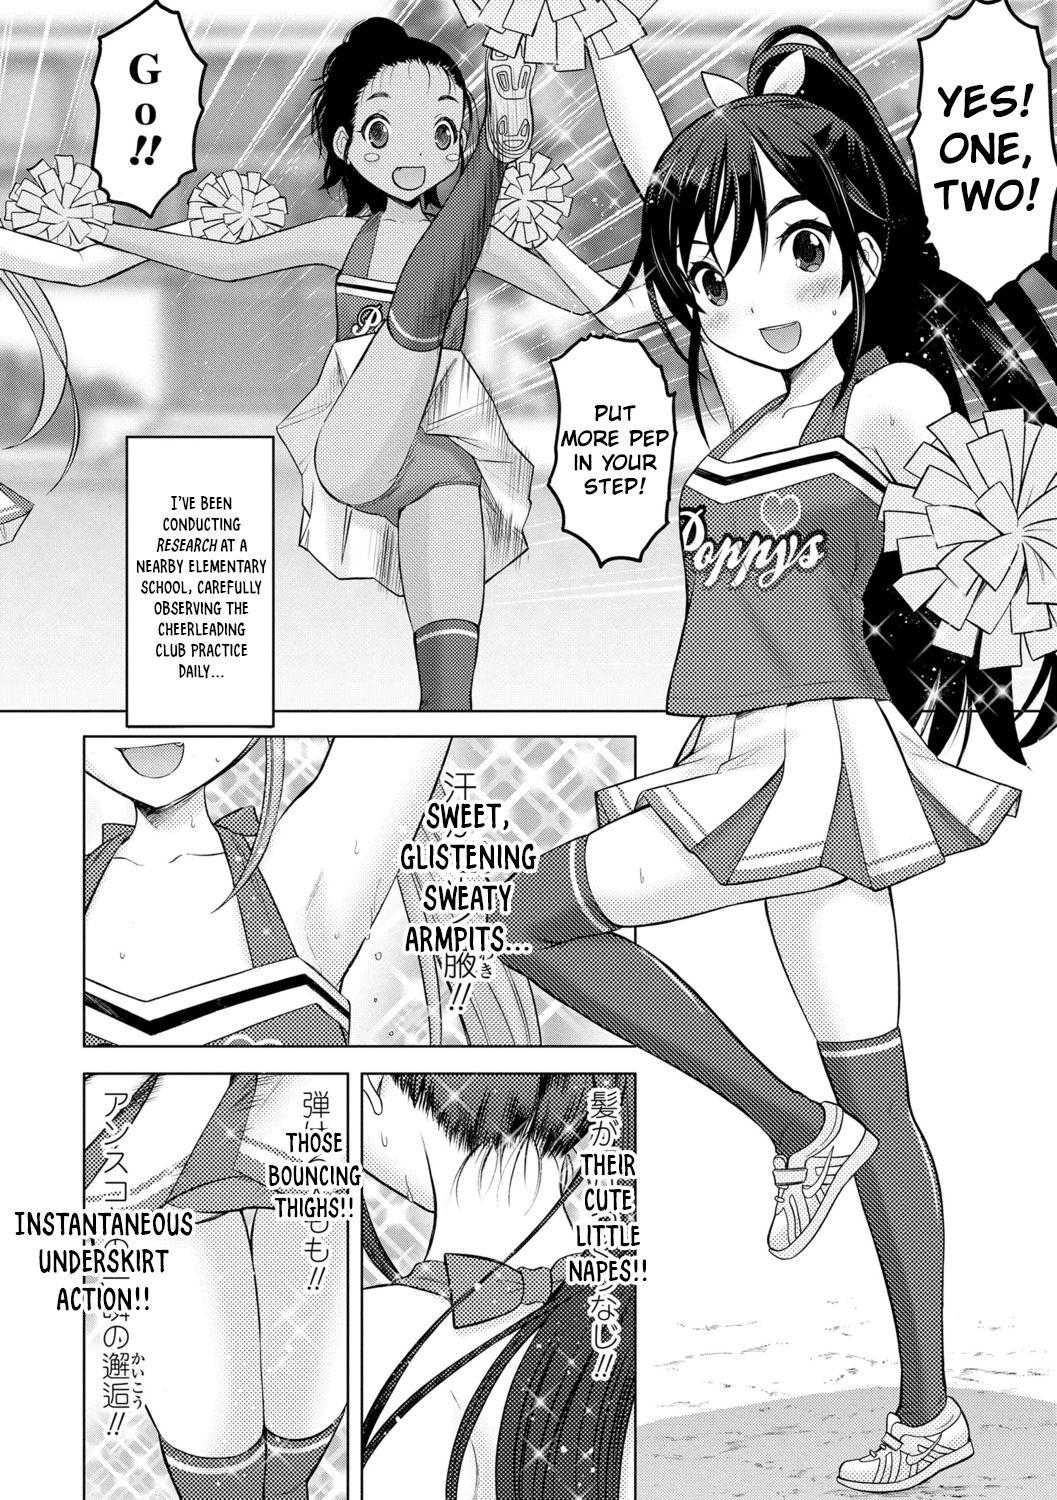 Amateurs Cheer Blossom! Chileno - Page 3